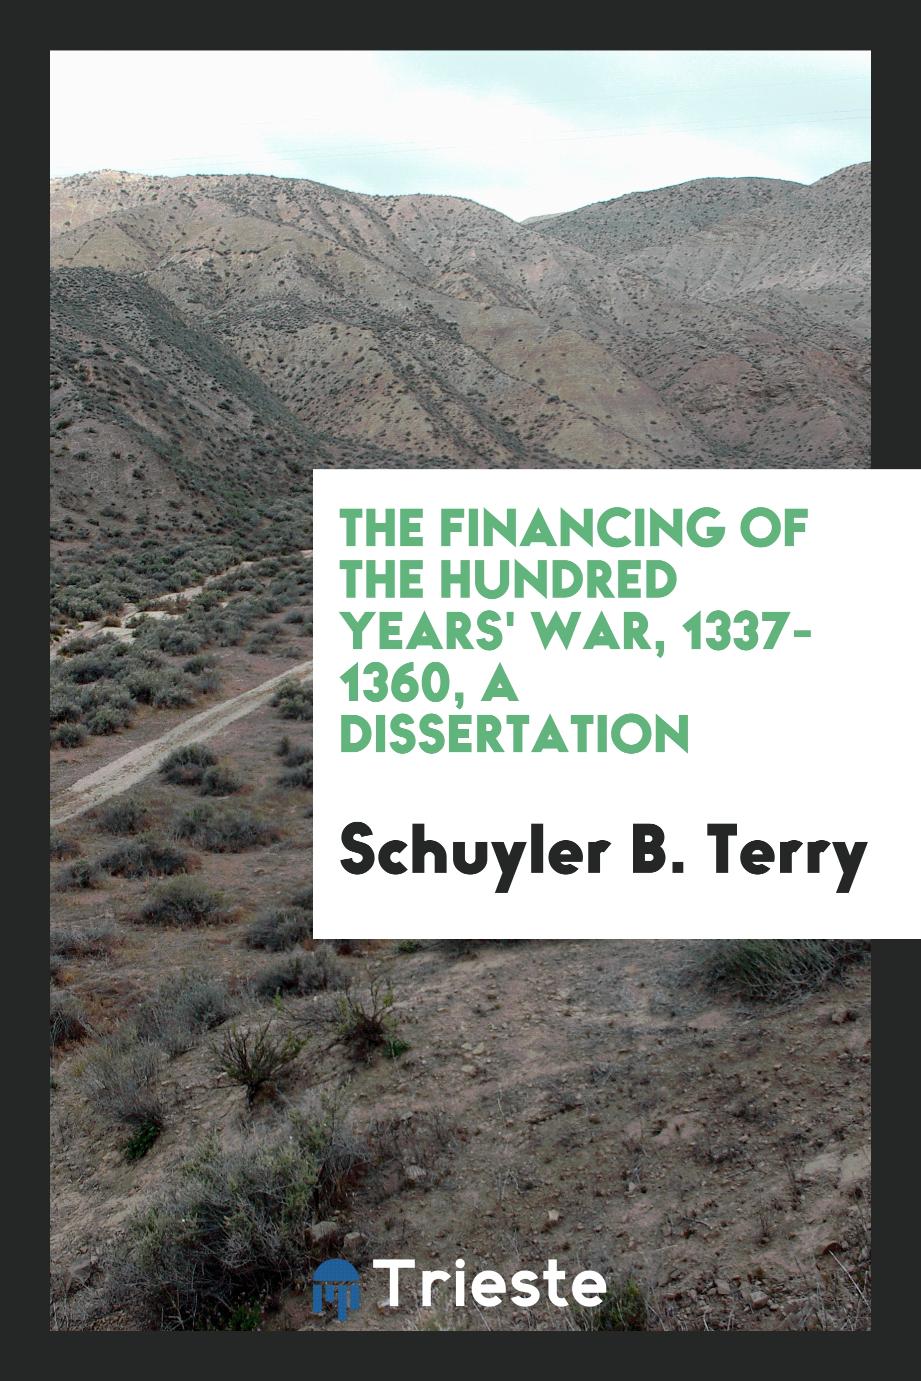 The financing of the hundred years' war, 1337-1360, a dissertation